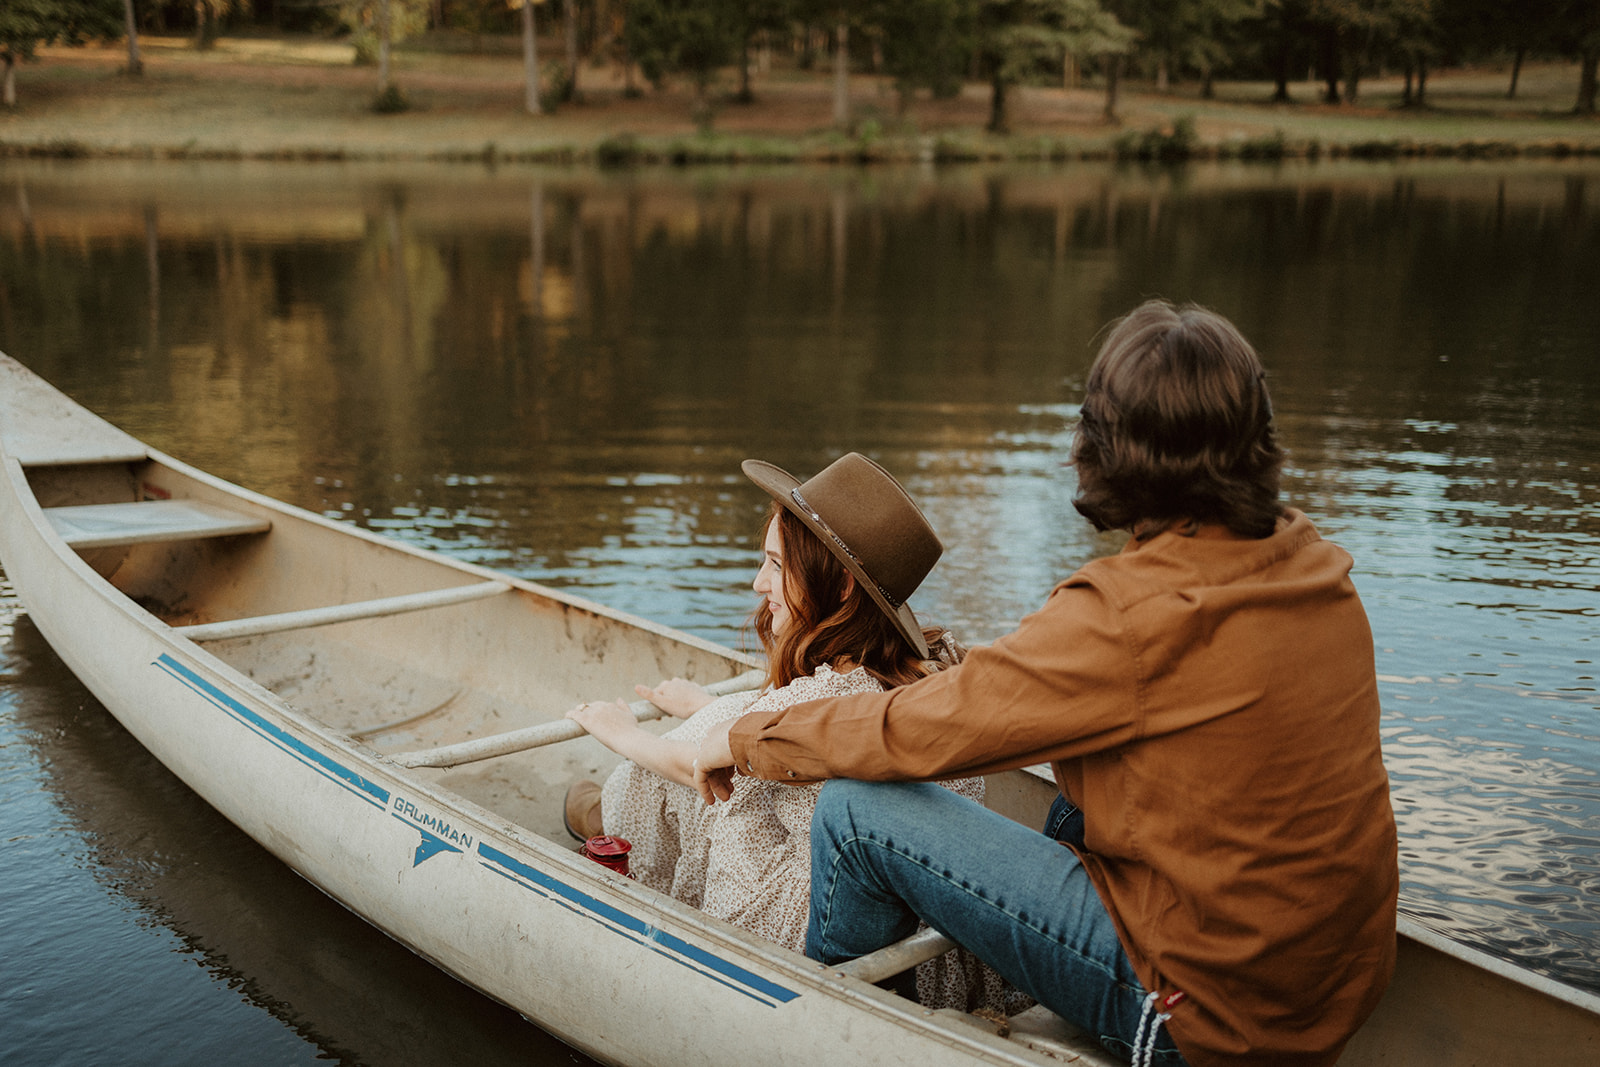 the couple floats on the lake in their canoe